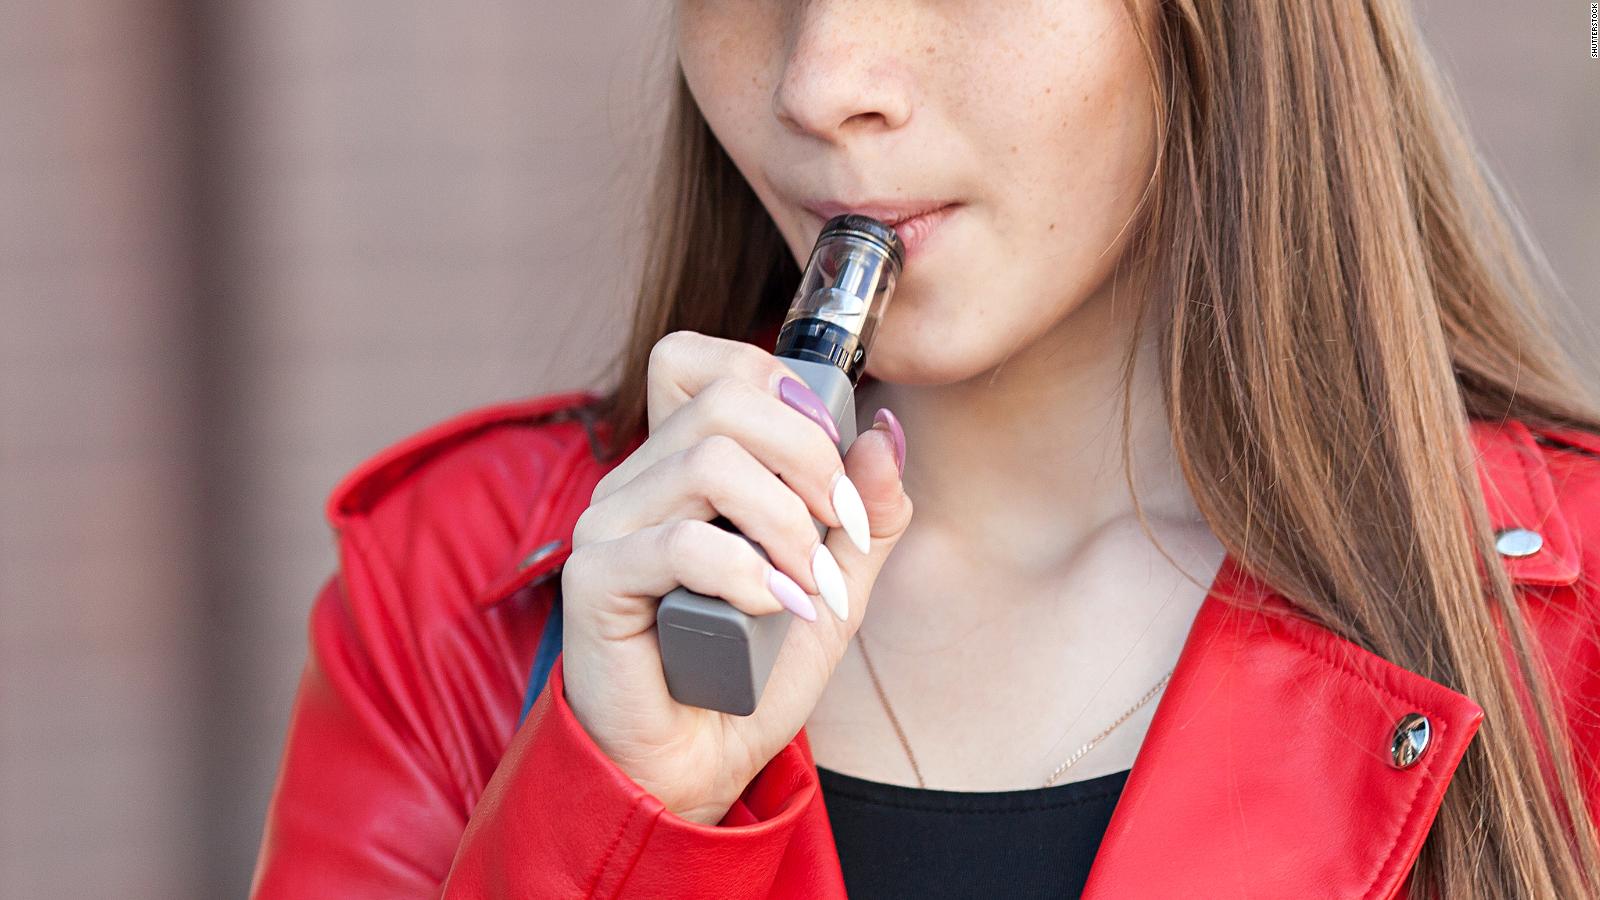 What parents should know about the 'huge epidemic' of vaping